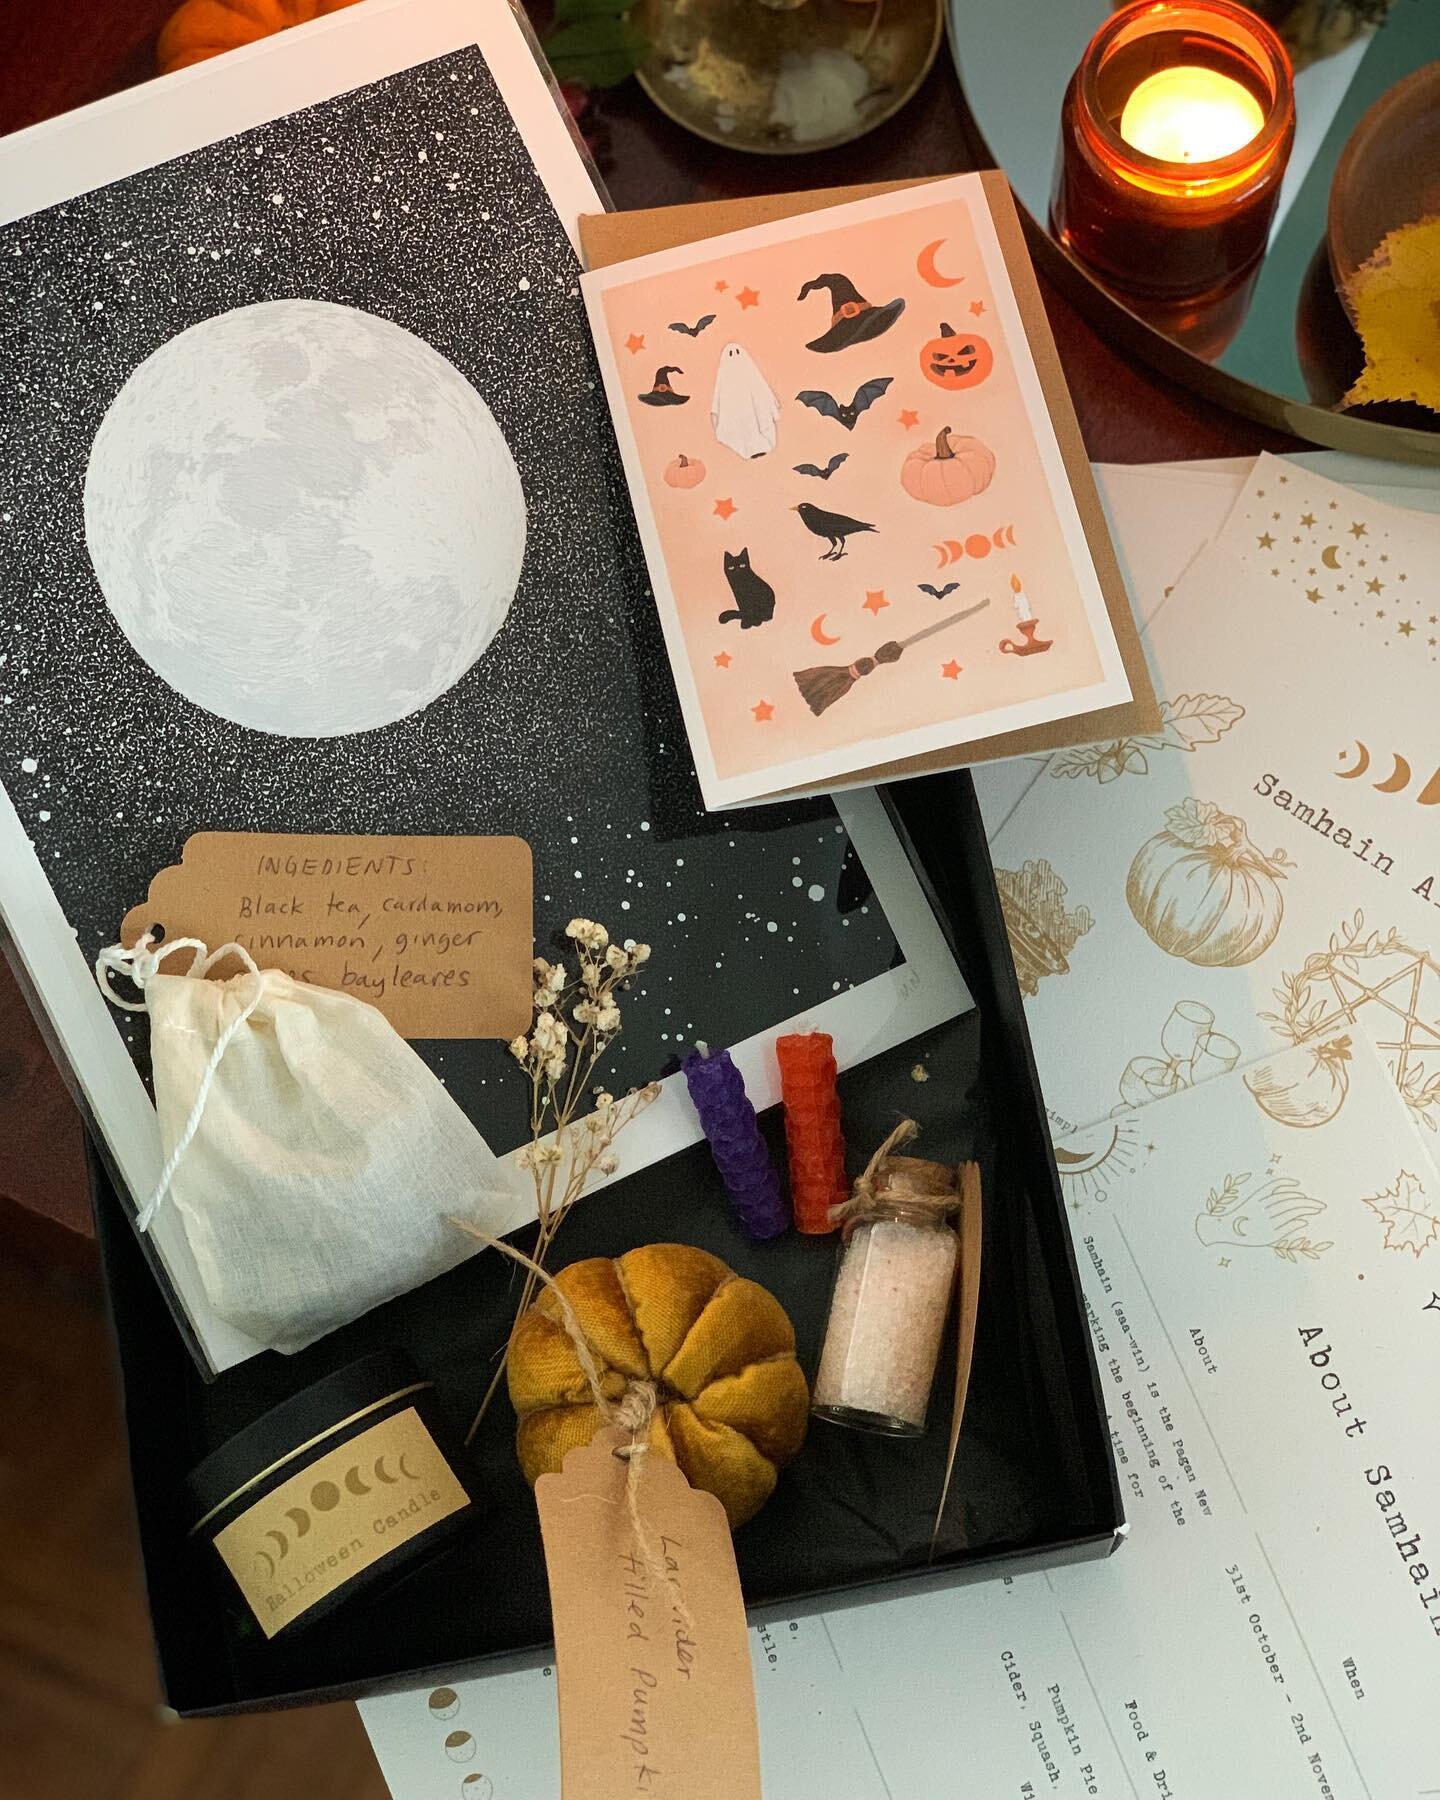 Last chance - order today! We have just two Halloween / Samhain boxes left and the are on sale today! We will ship the box today with free next day delivery. Order before 12 today (Thursday) to get it for Halloween 🎃 Out Halloween / Samhain box has 